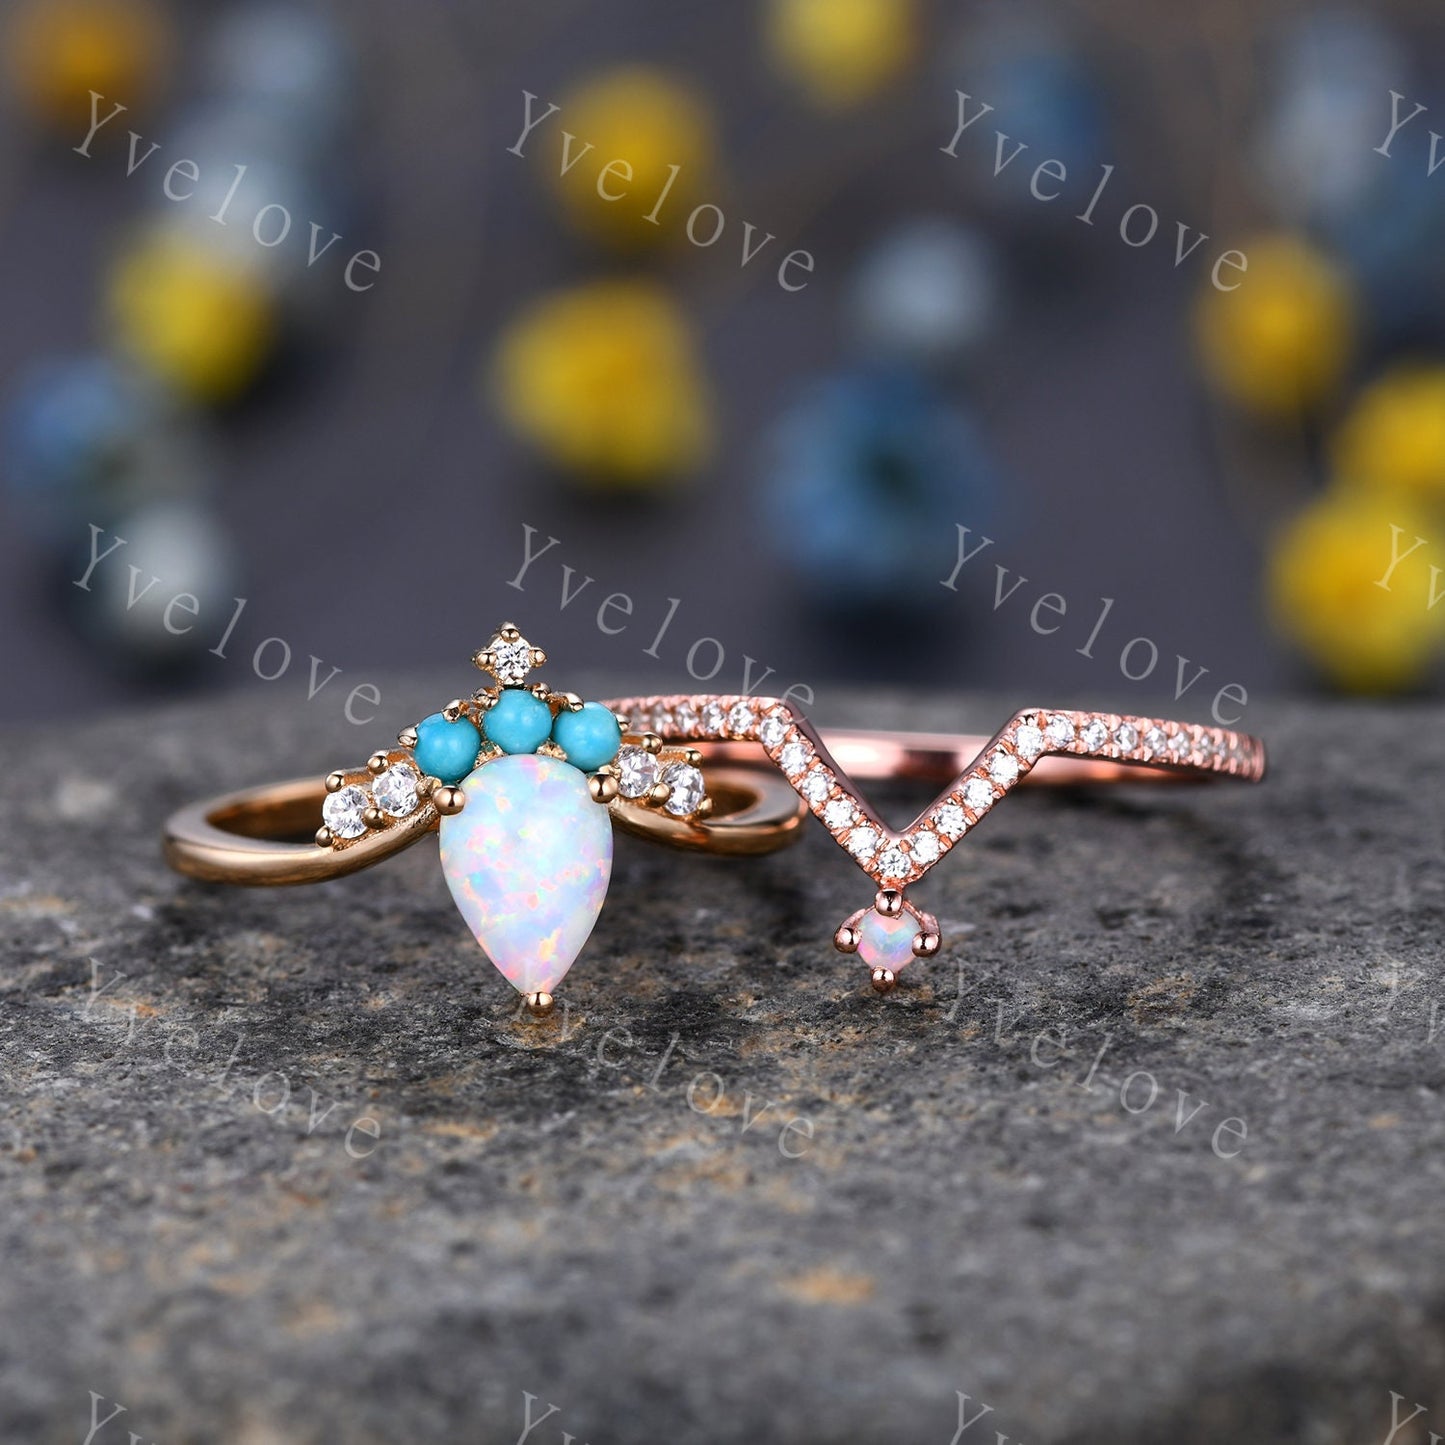 Pear Shaped Opal Ring Set,14K Yellow Gold,White  Opal Turquoise Wedding Ring,Bridal Ring Set,V Shaped Curved Stackable Matching Band Gift